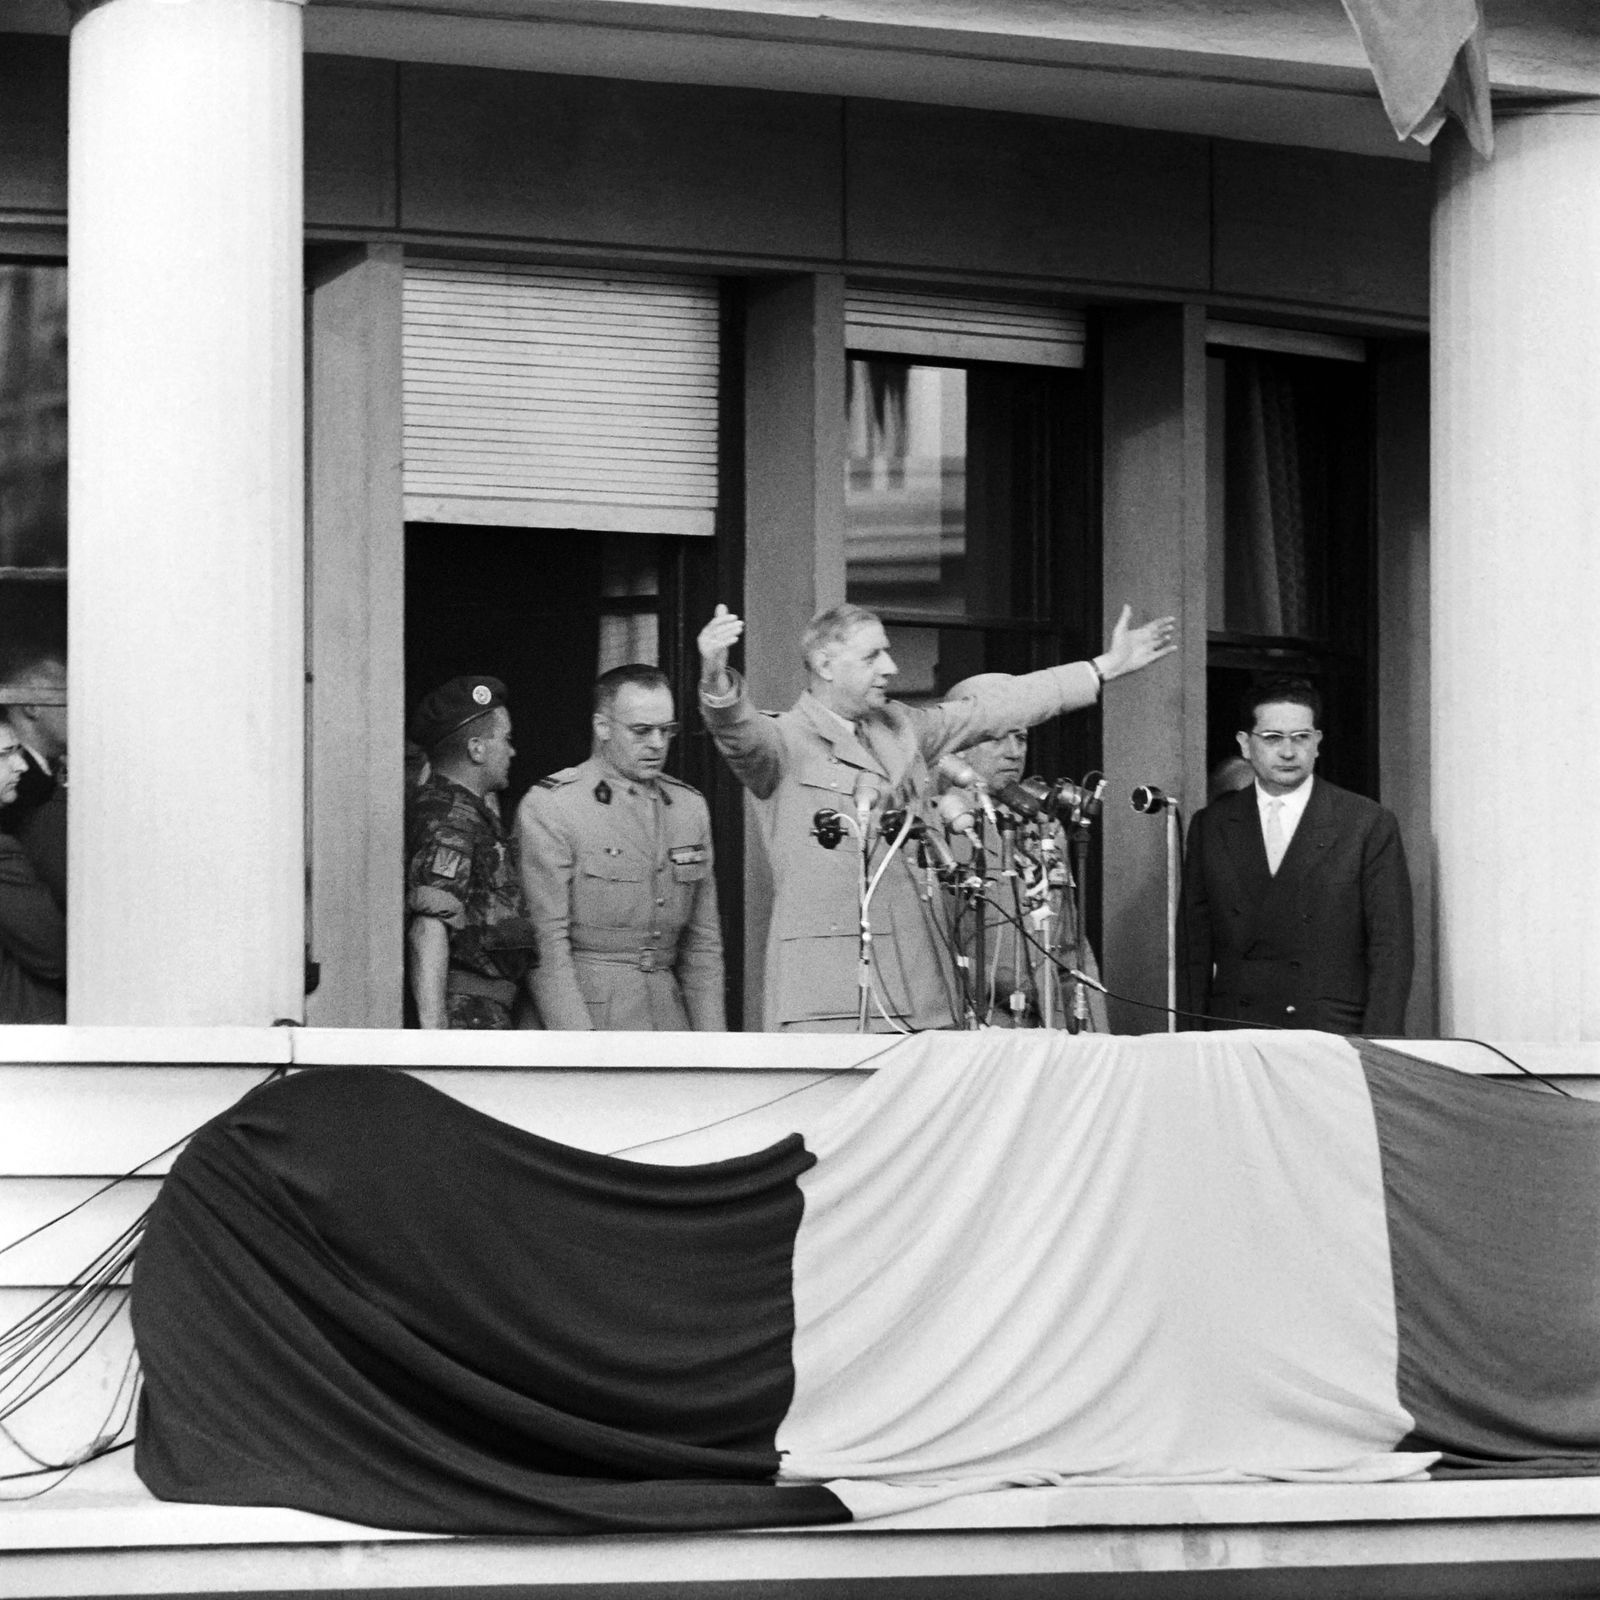 (FILES) In this file photo taken on June 4, 1958, French head of government General Charles de Gaulle (C) dressed in his general's uniform, delivers a speech from the balcony of the general Government building at the Forum in Algiers, during which he pronounced the famous sentence 